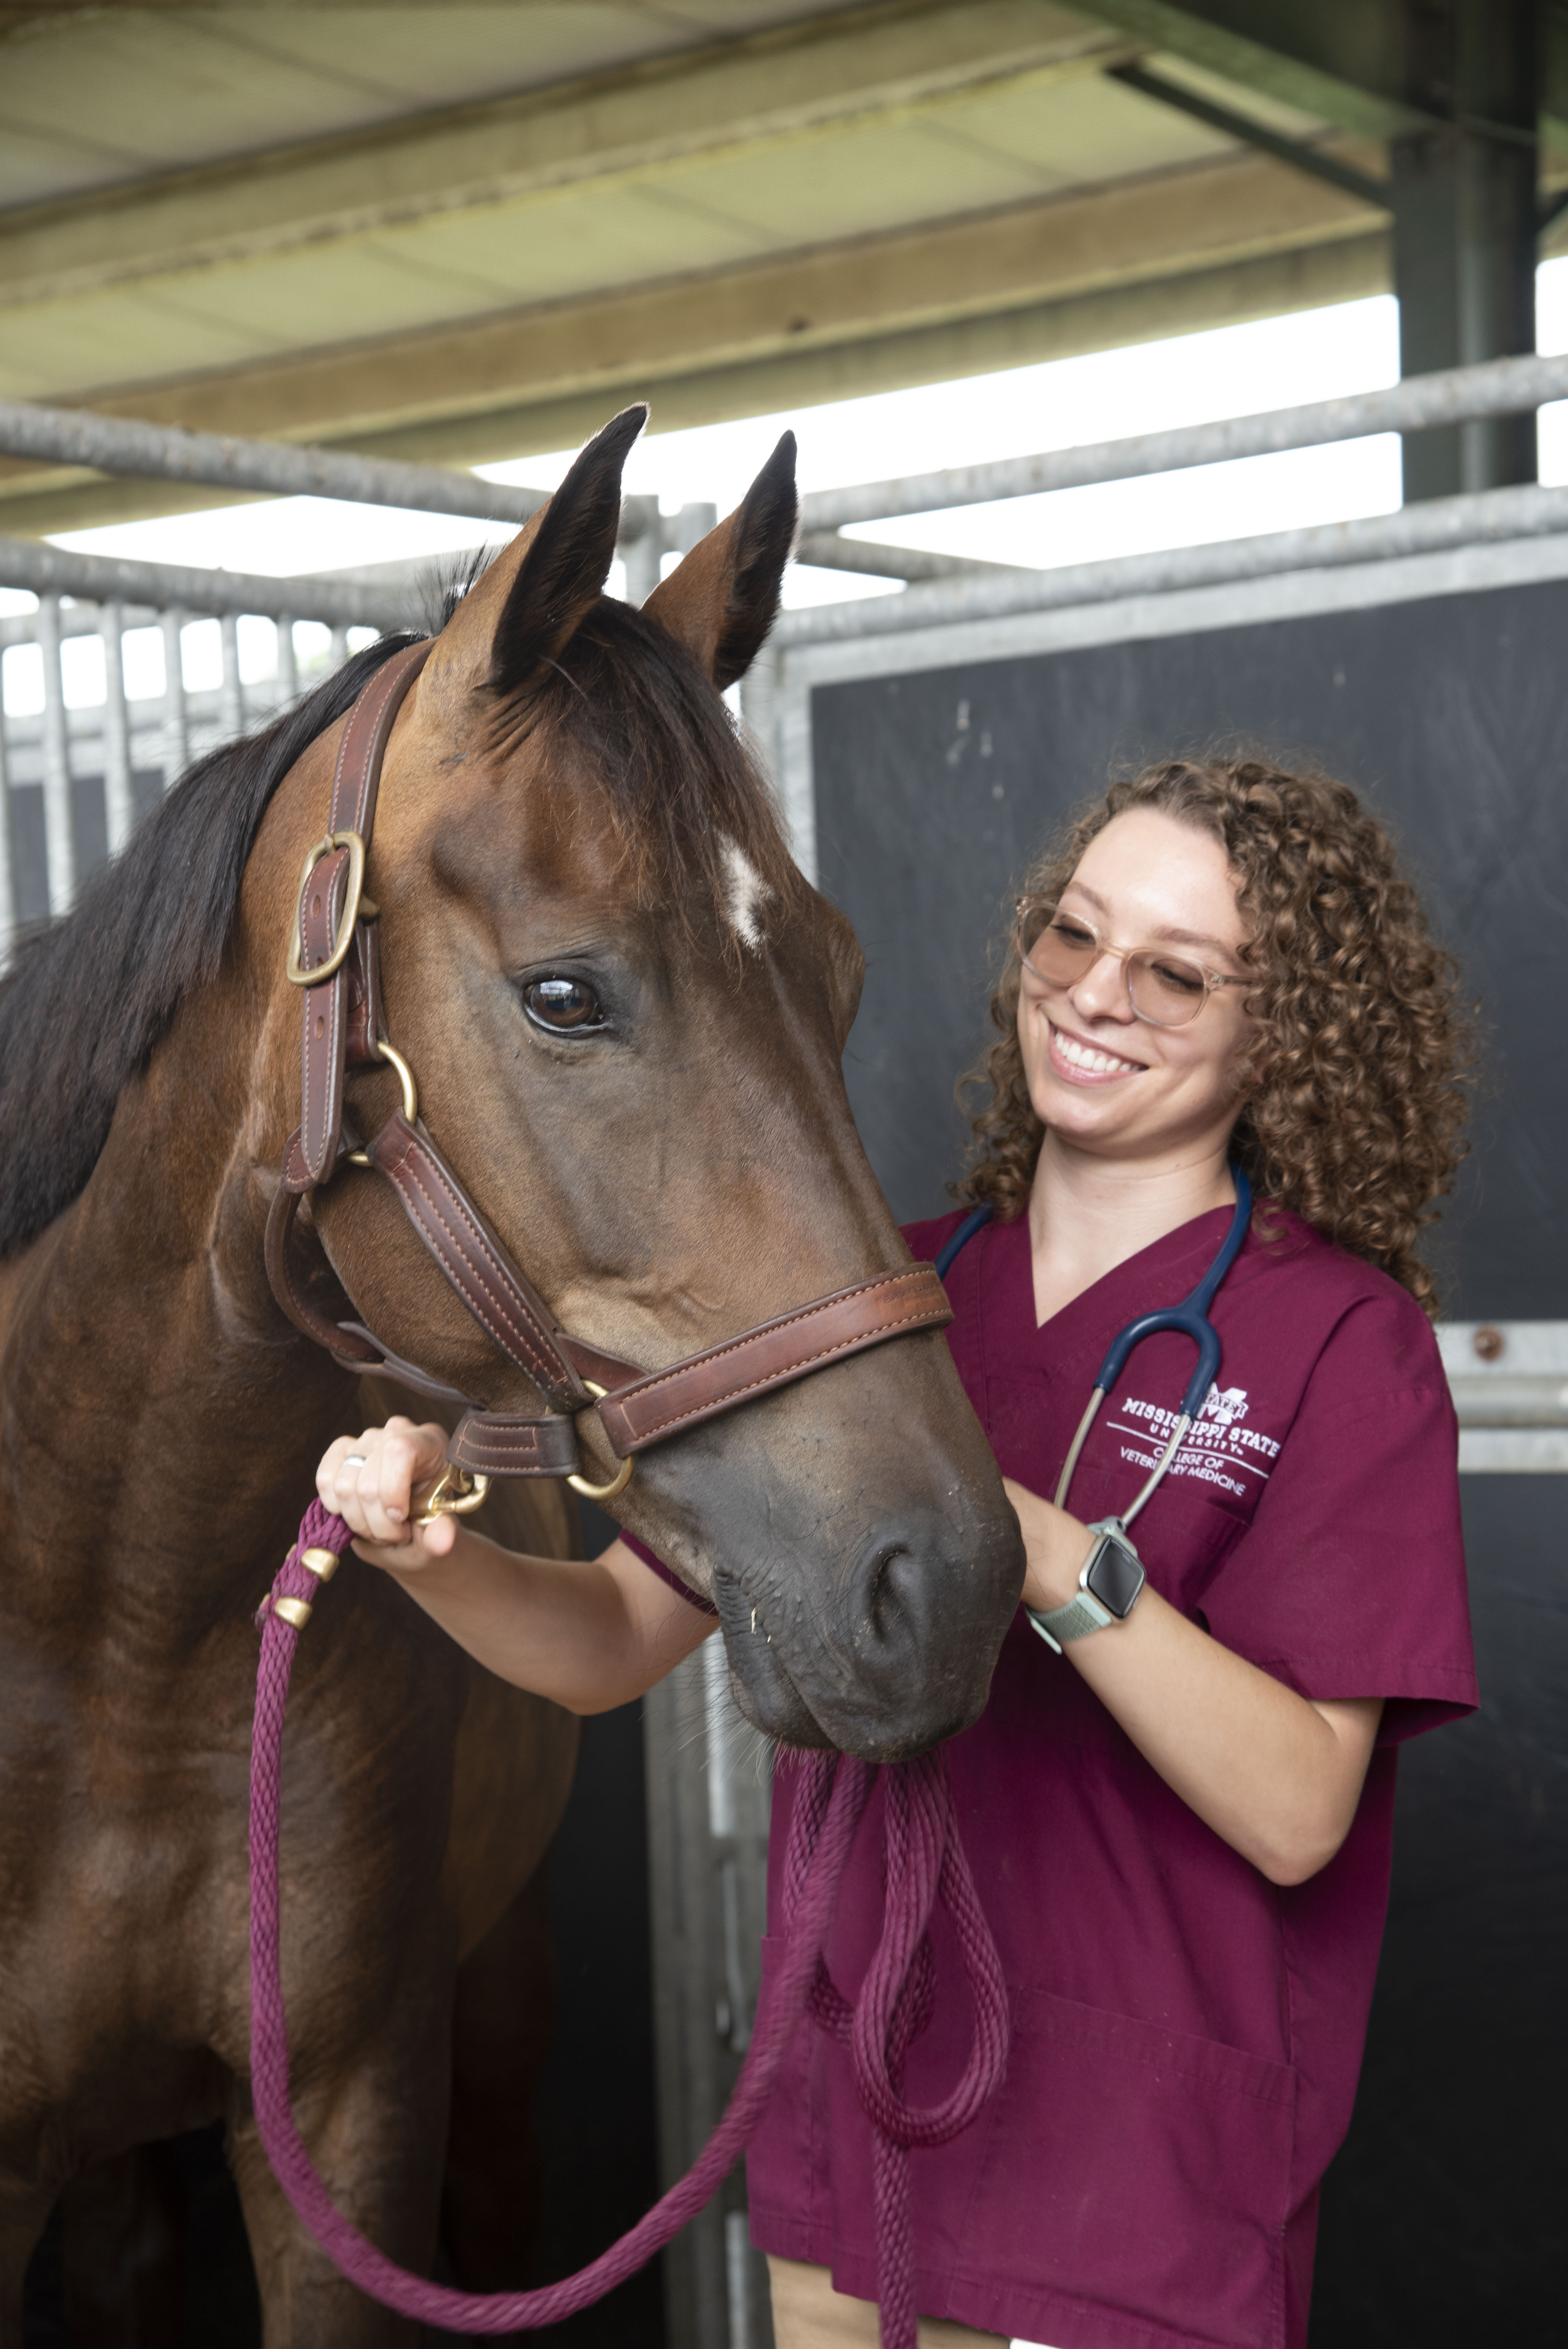 A veterinary student poses with a horse